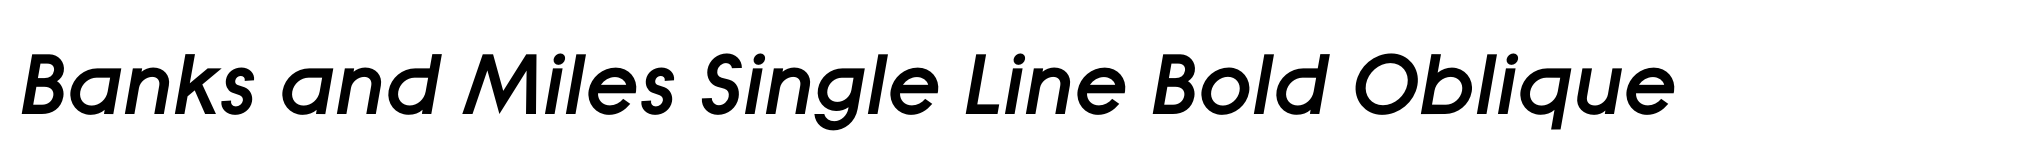 Banks and Miles Single Line Bold Oblique image